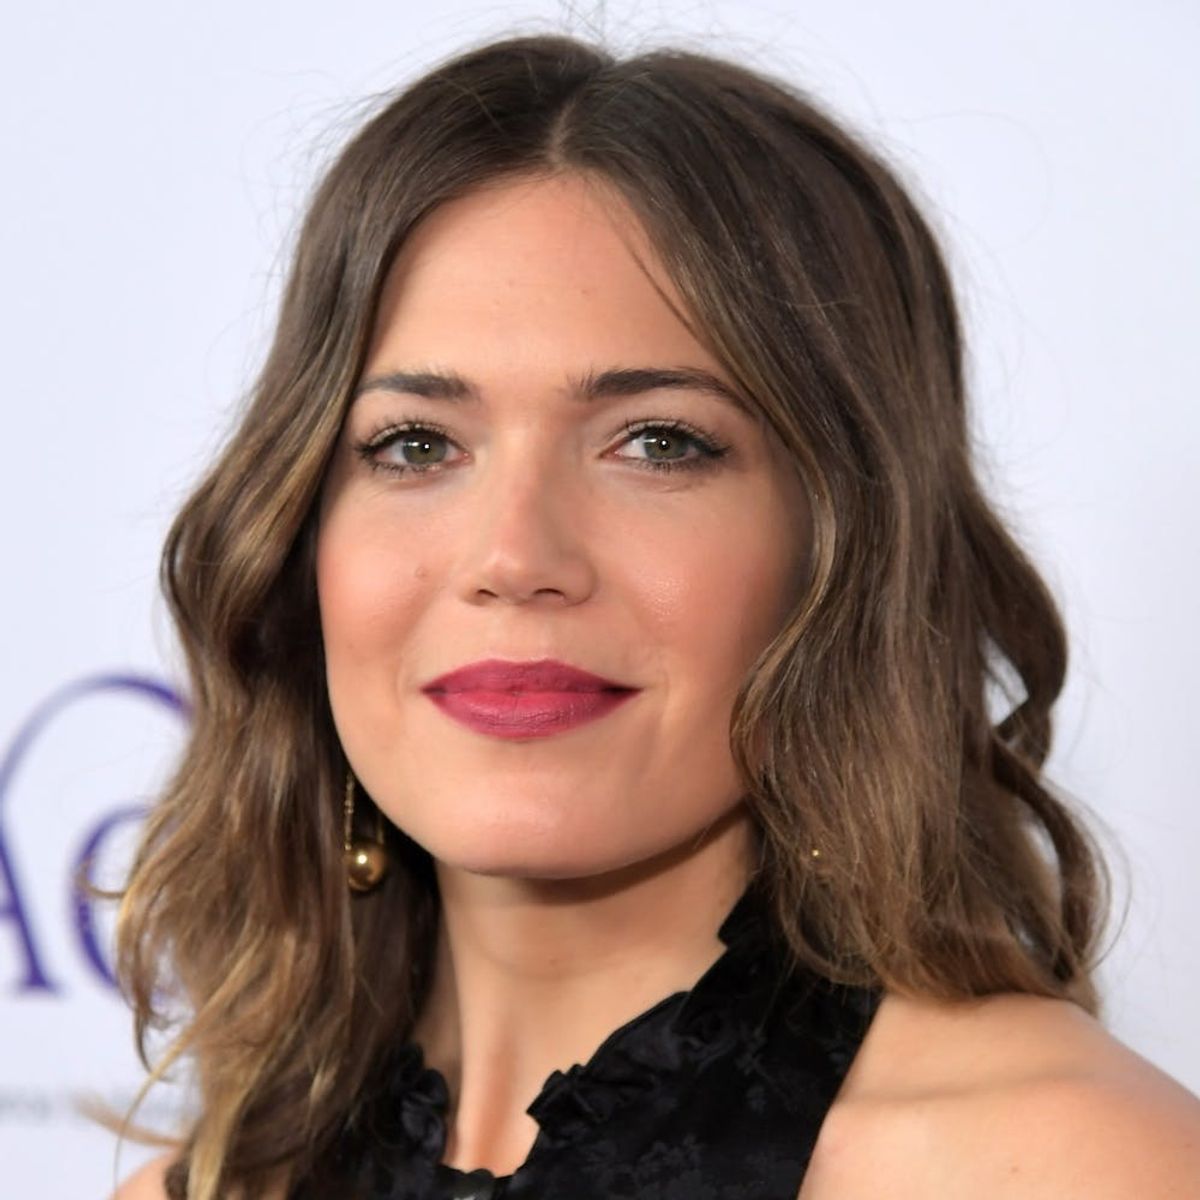 Who Wore This Red Carpet Look Better: Kate Middleton or Mandy Moore?